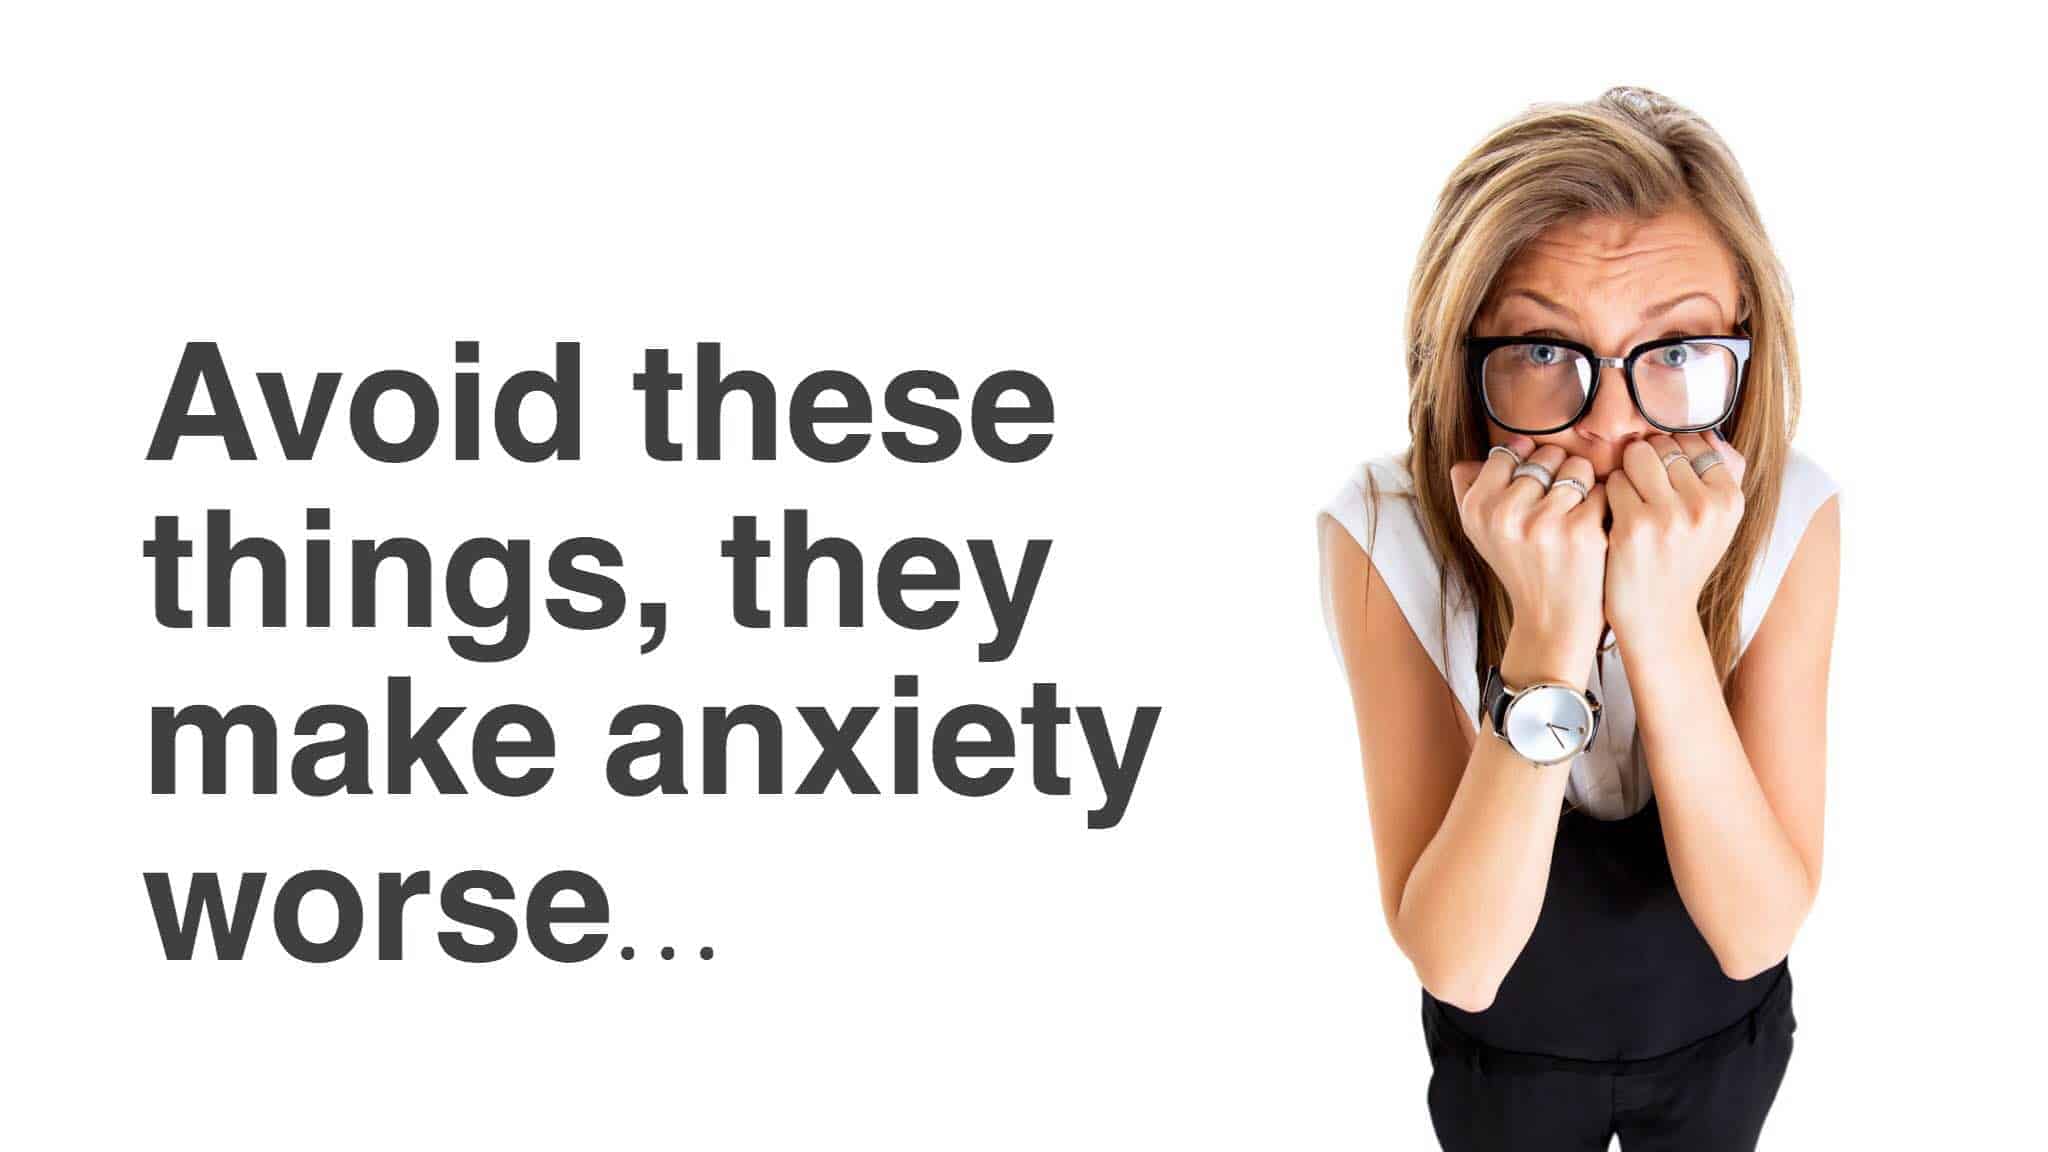 10 Habits That Make Anxiety Worse (And How to Avoid Having Them)